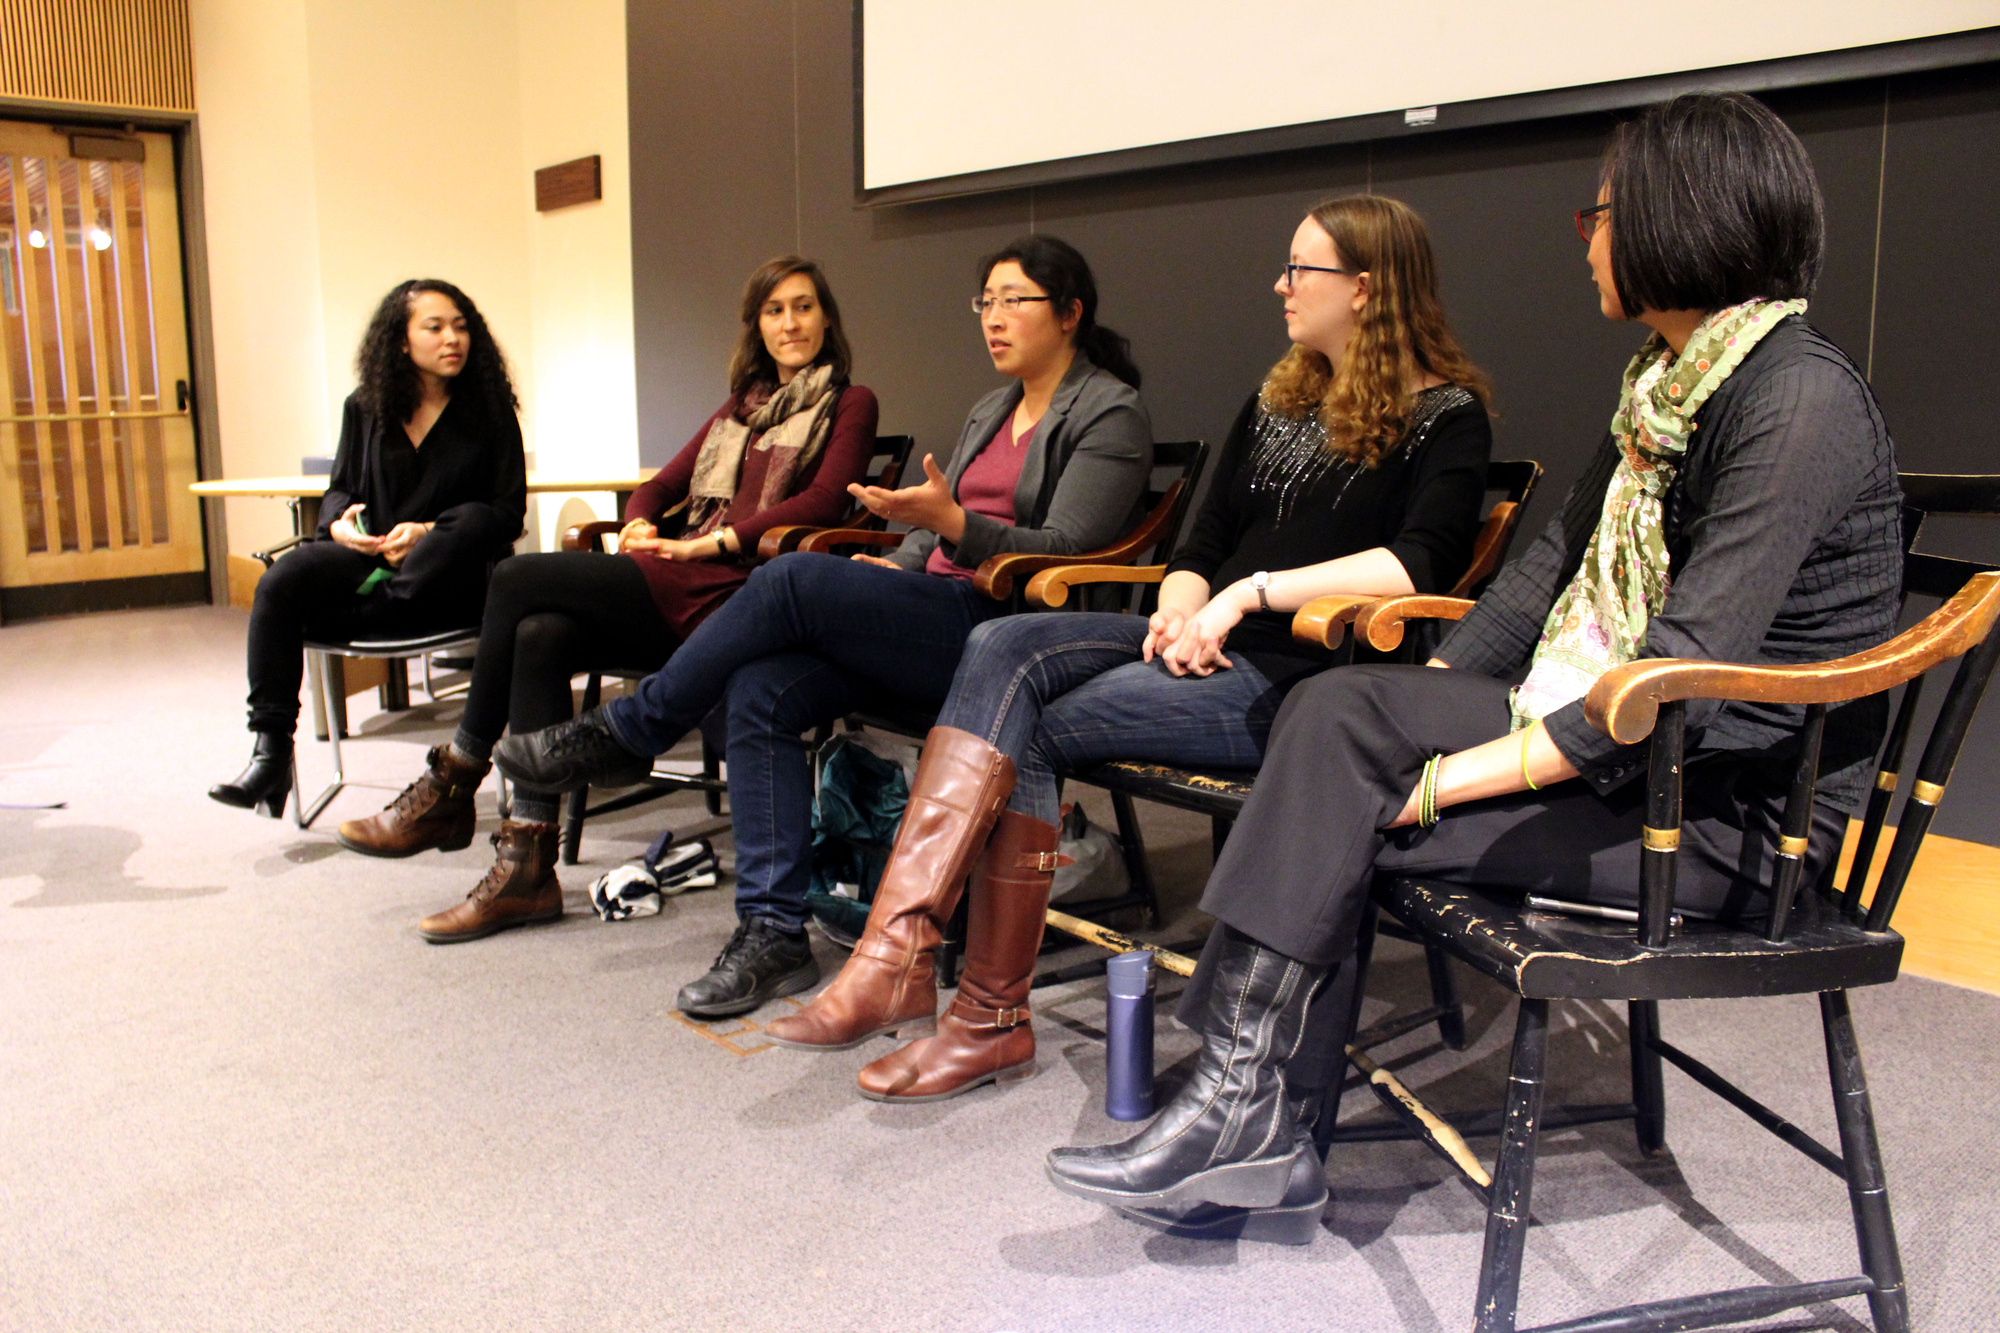 WiSTEM Year-End Career Panelists discussing in Fong Auditorium